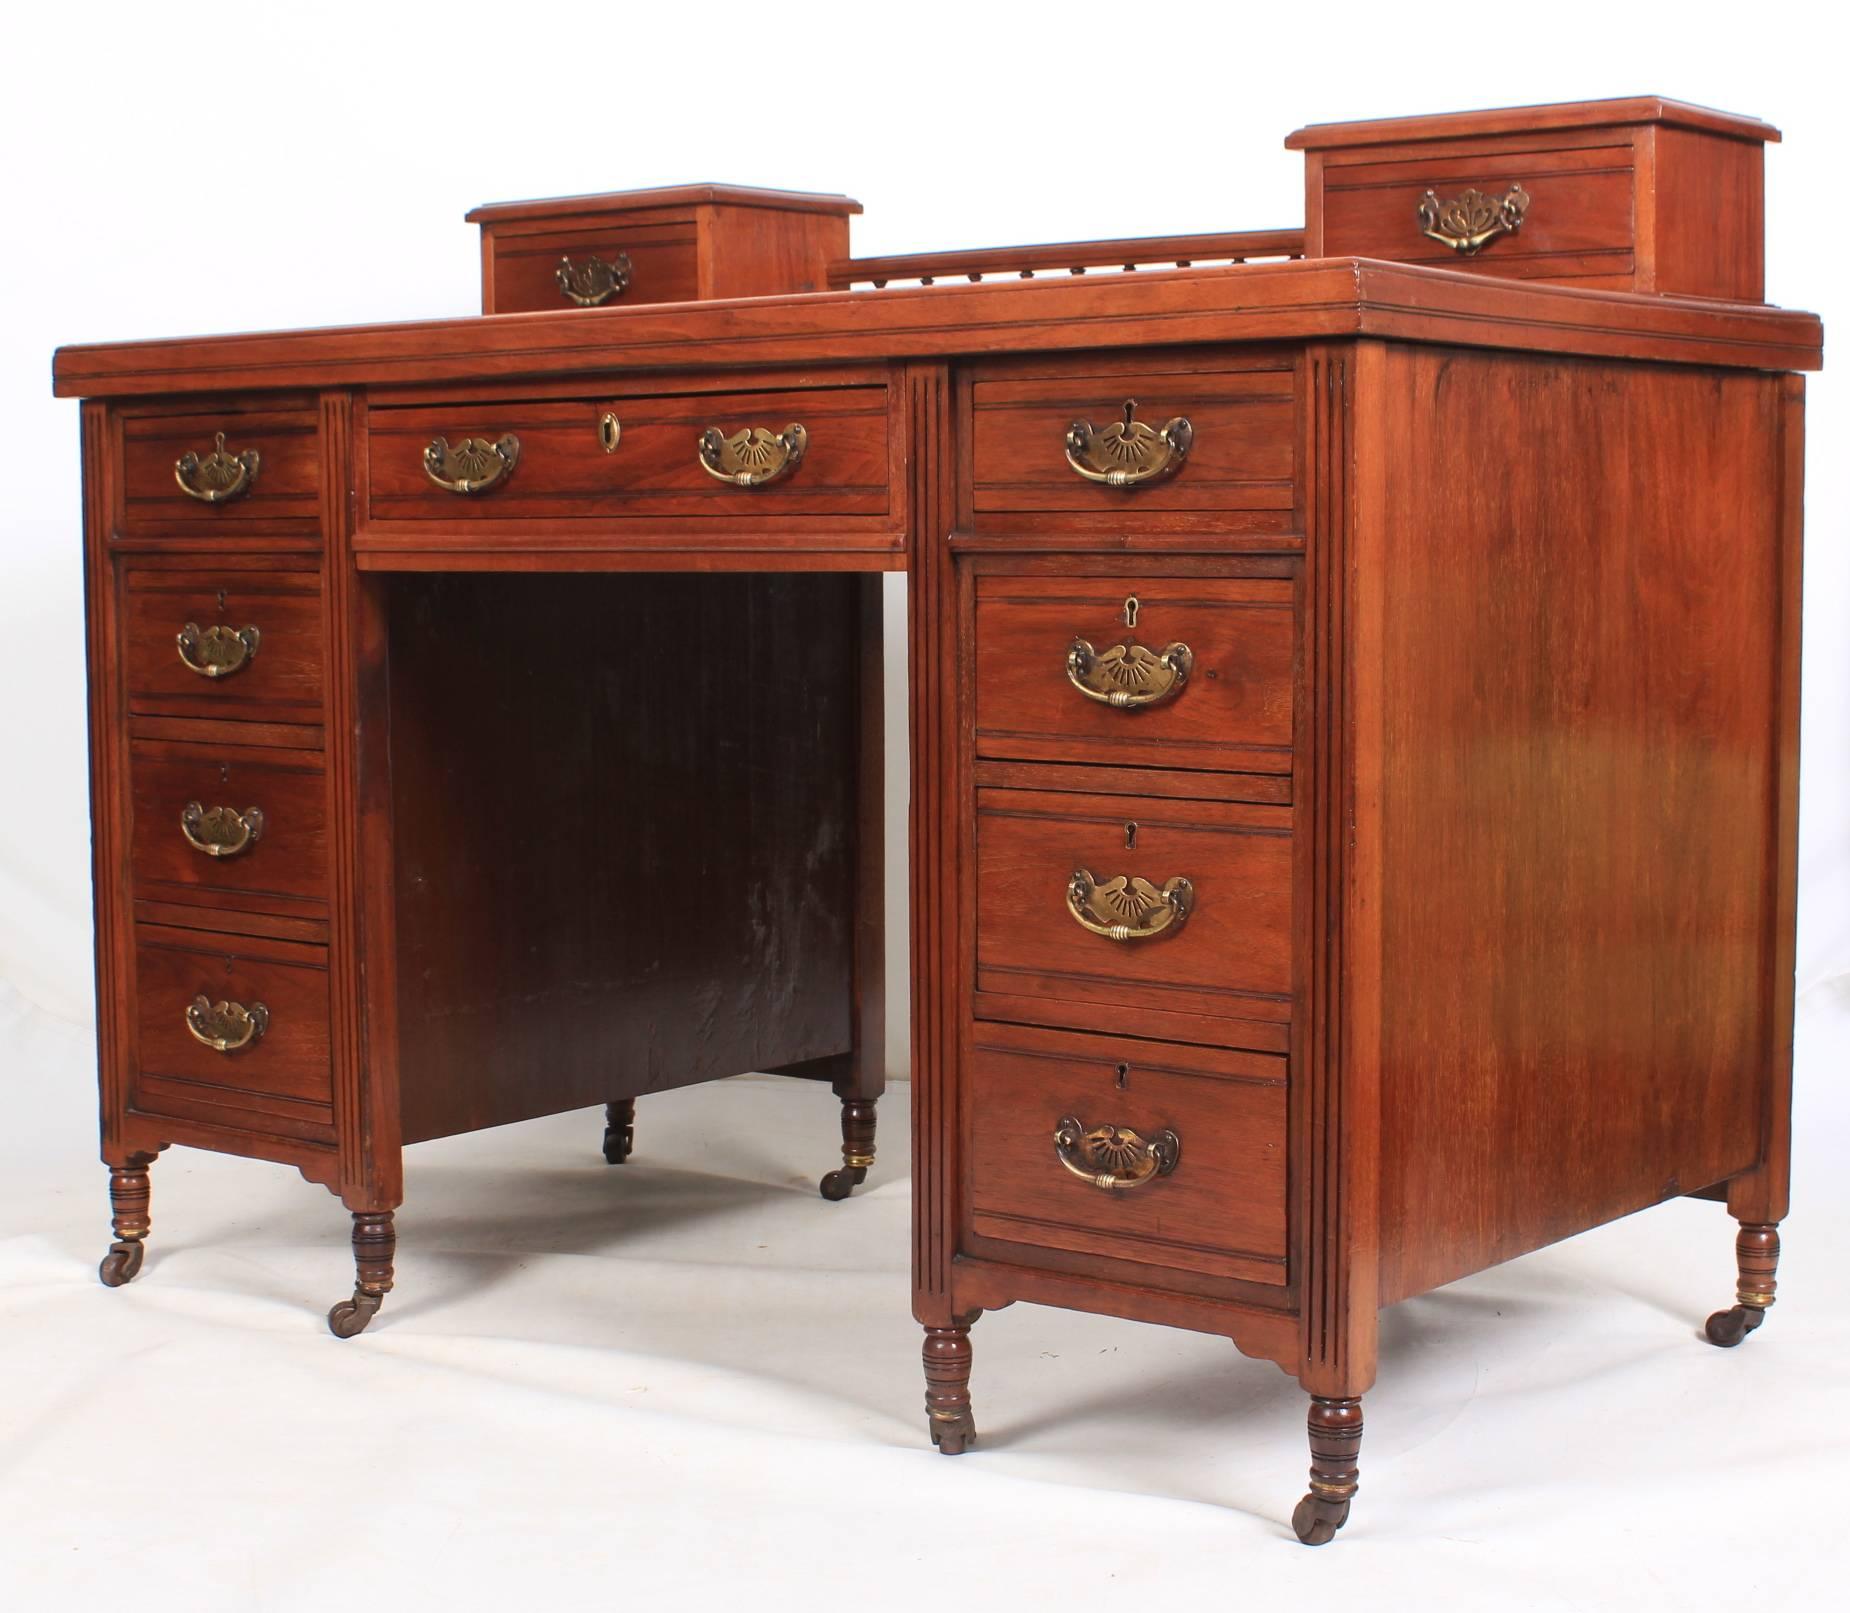 English, circa 1900.
This pedestal desk is offered in showroom condition.
It can be broken down into three parts for easy transportation.
The top has a small drawer either side with a galleried back in between.
There are three drawers along the